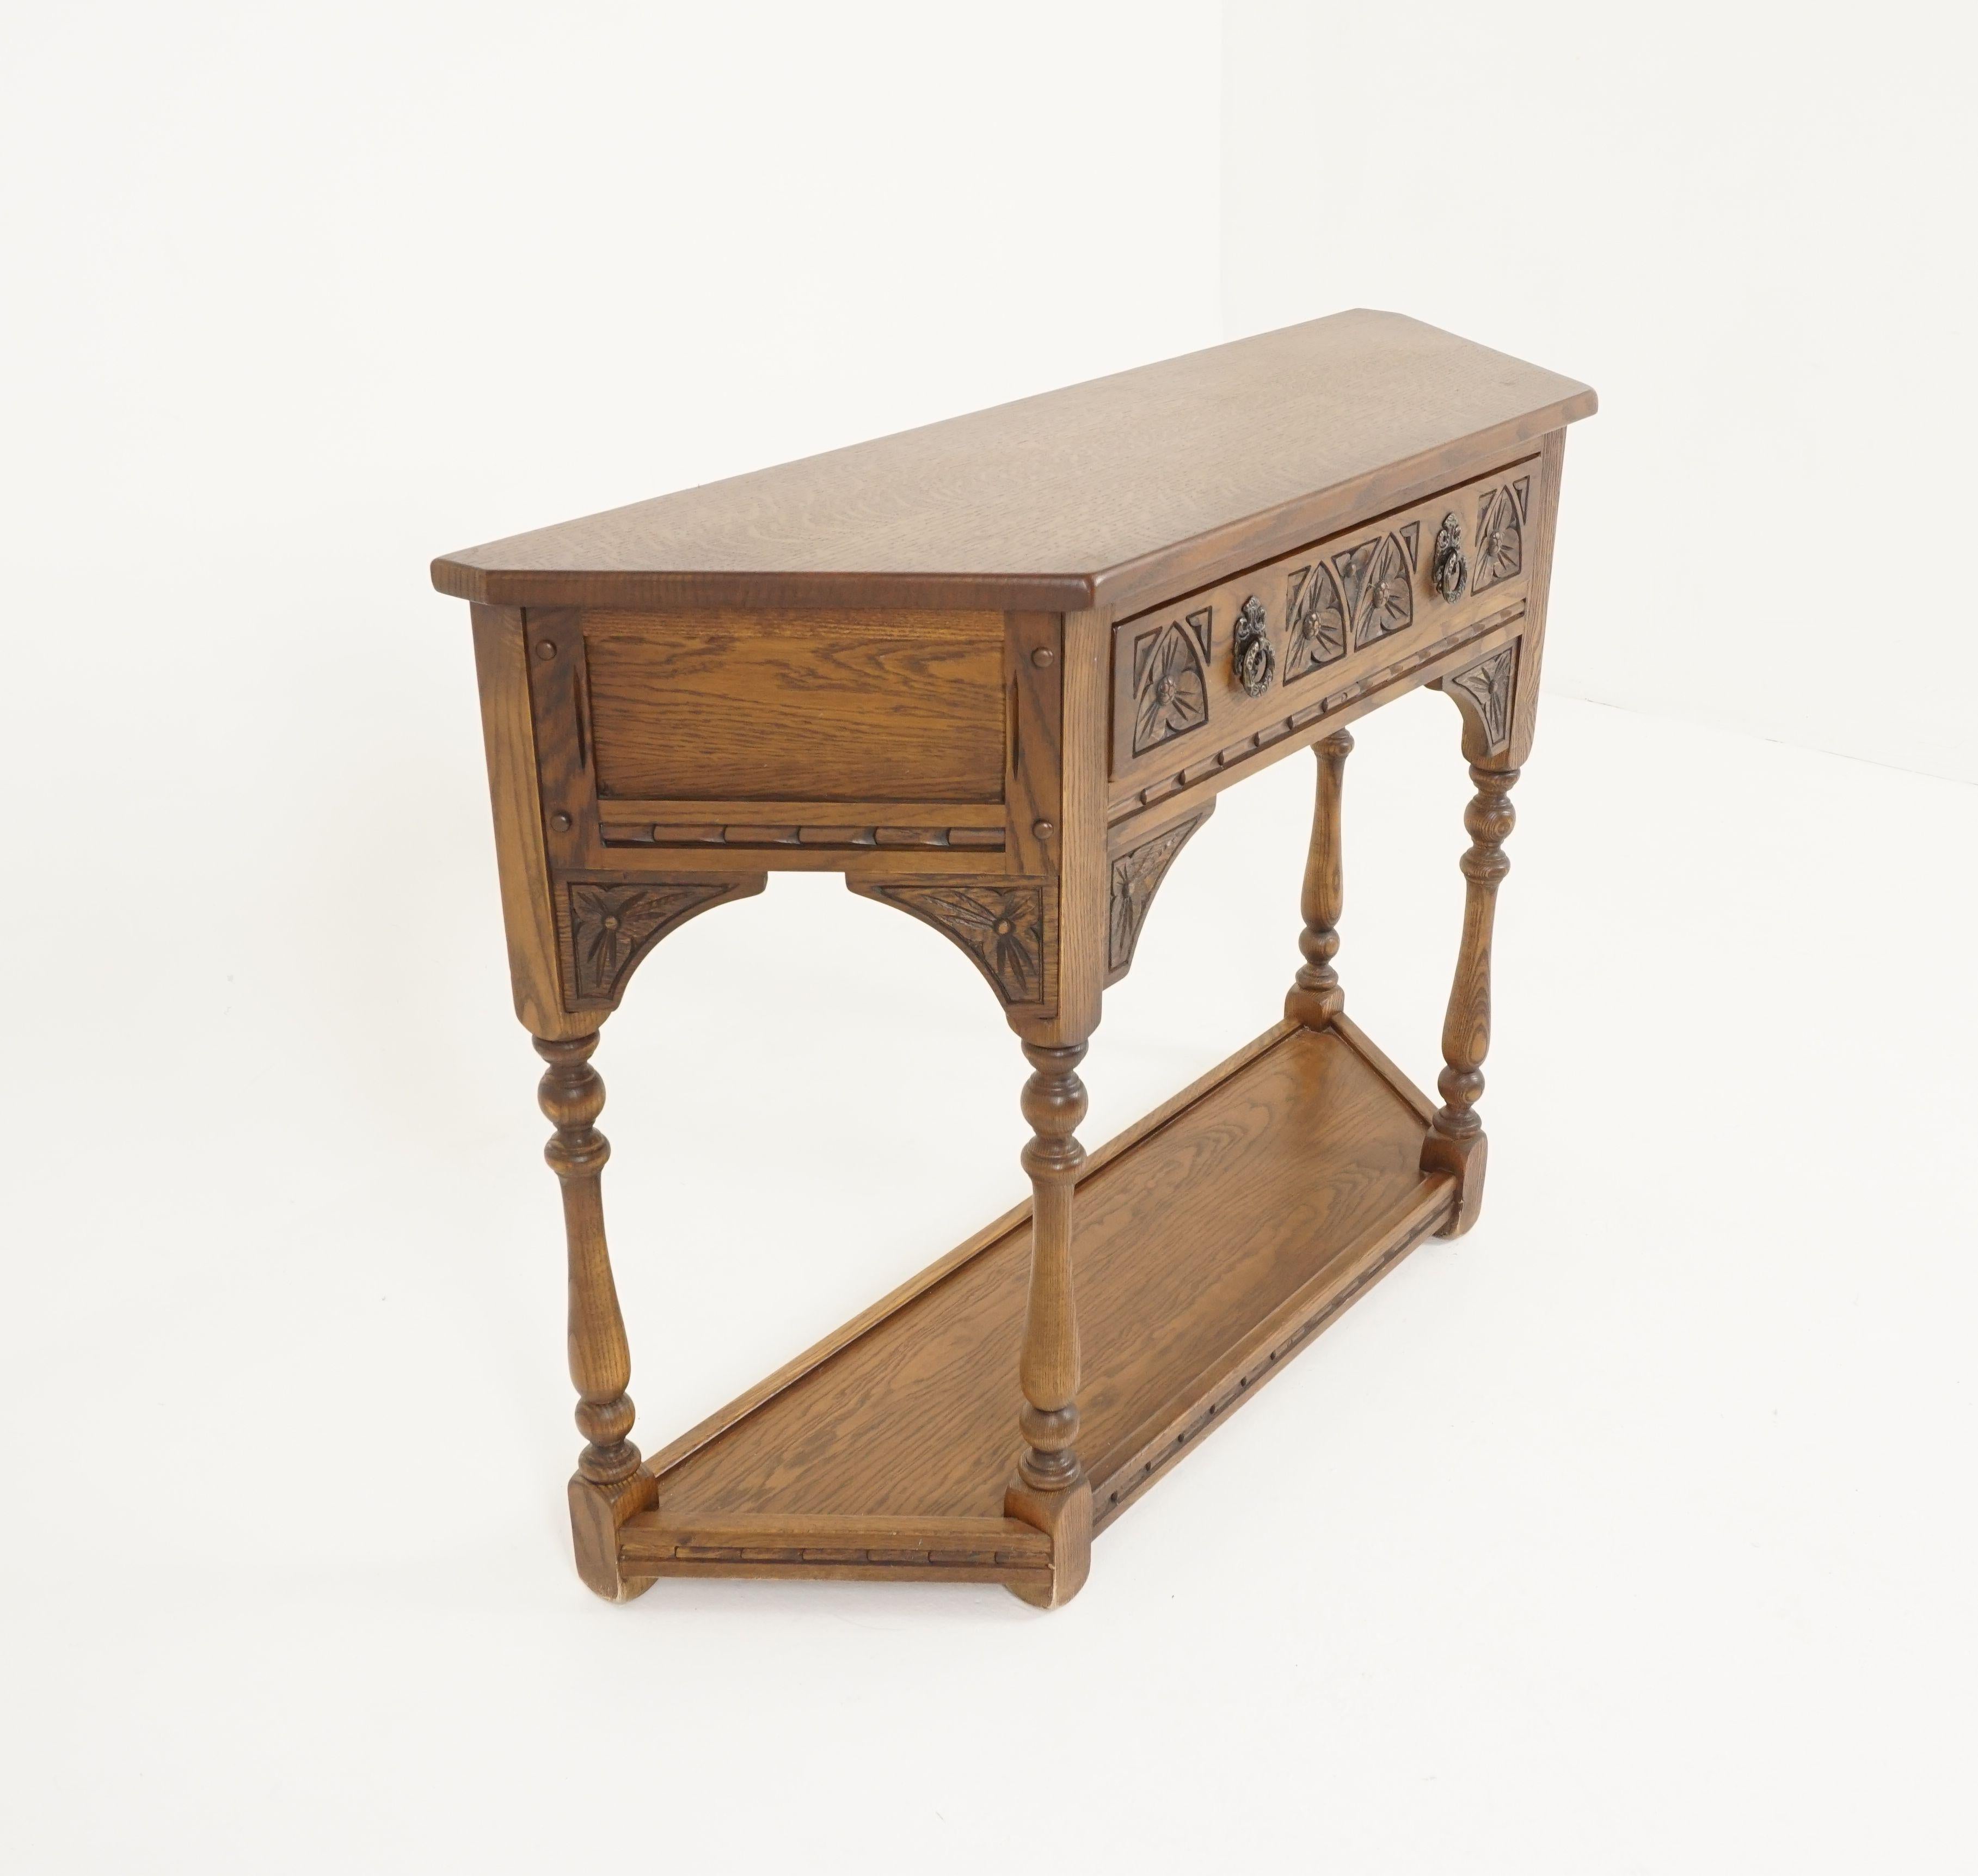 Vintage carved oak hall table, sofa table, England, 1940

Scotland, 1940
Solid oak
Original finish
Oak top
Single carved drawer underneath
Standing on turned legs
With undershelf and moulding on the base 

B2309

Measures: 41